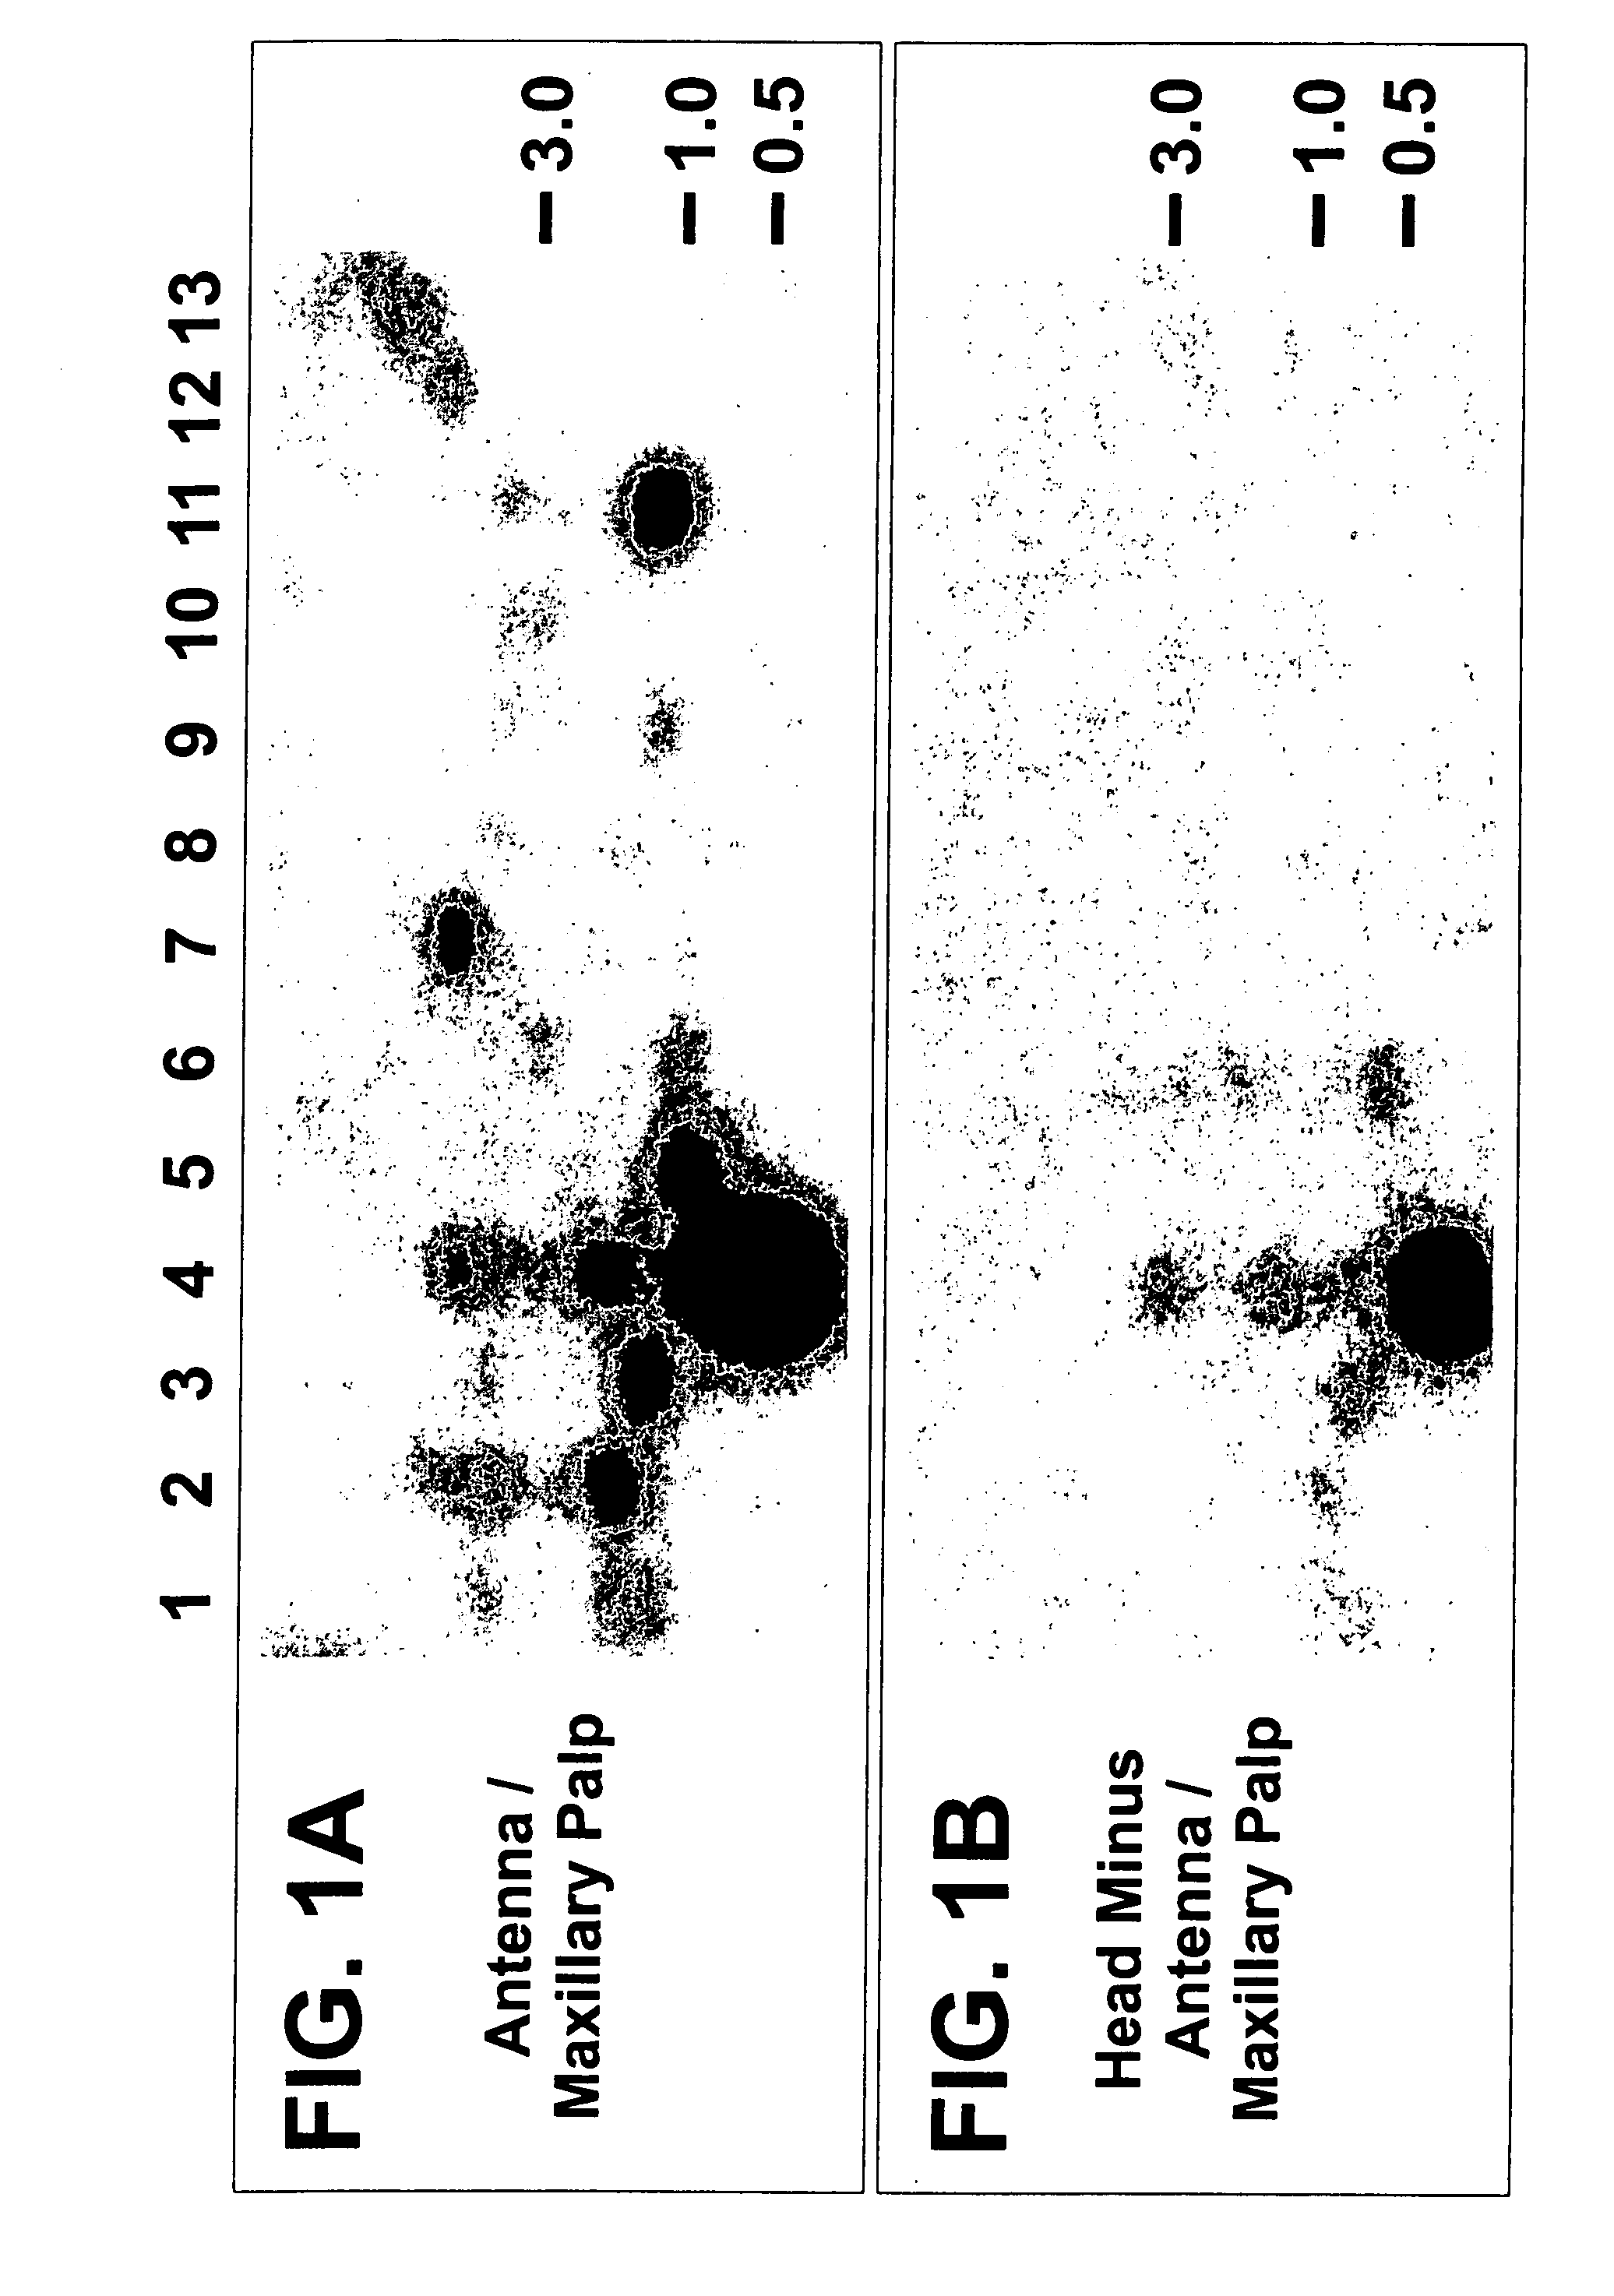 Genes encoding insect odorant receptors and uses thereof